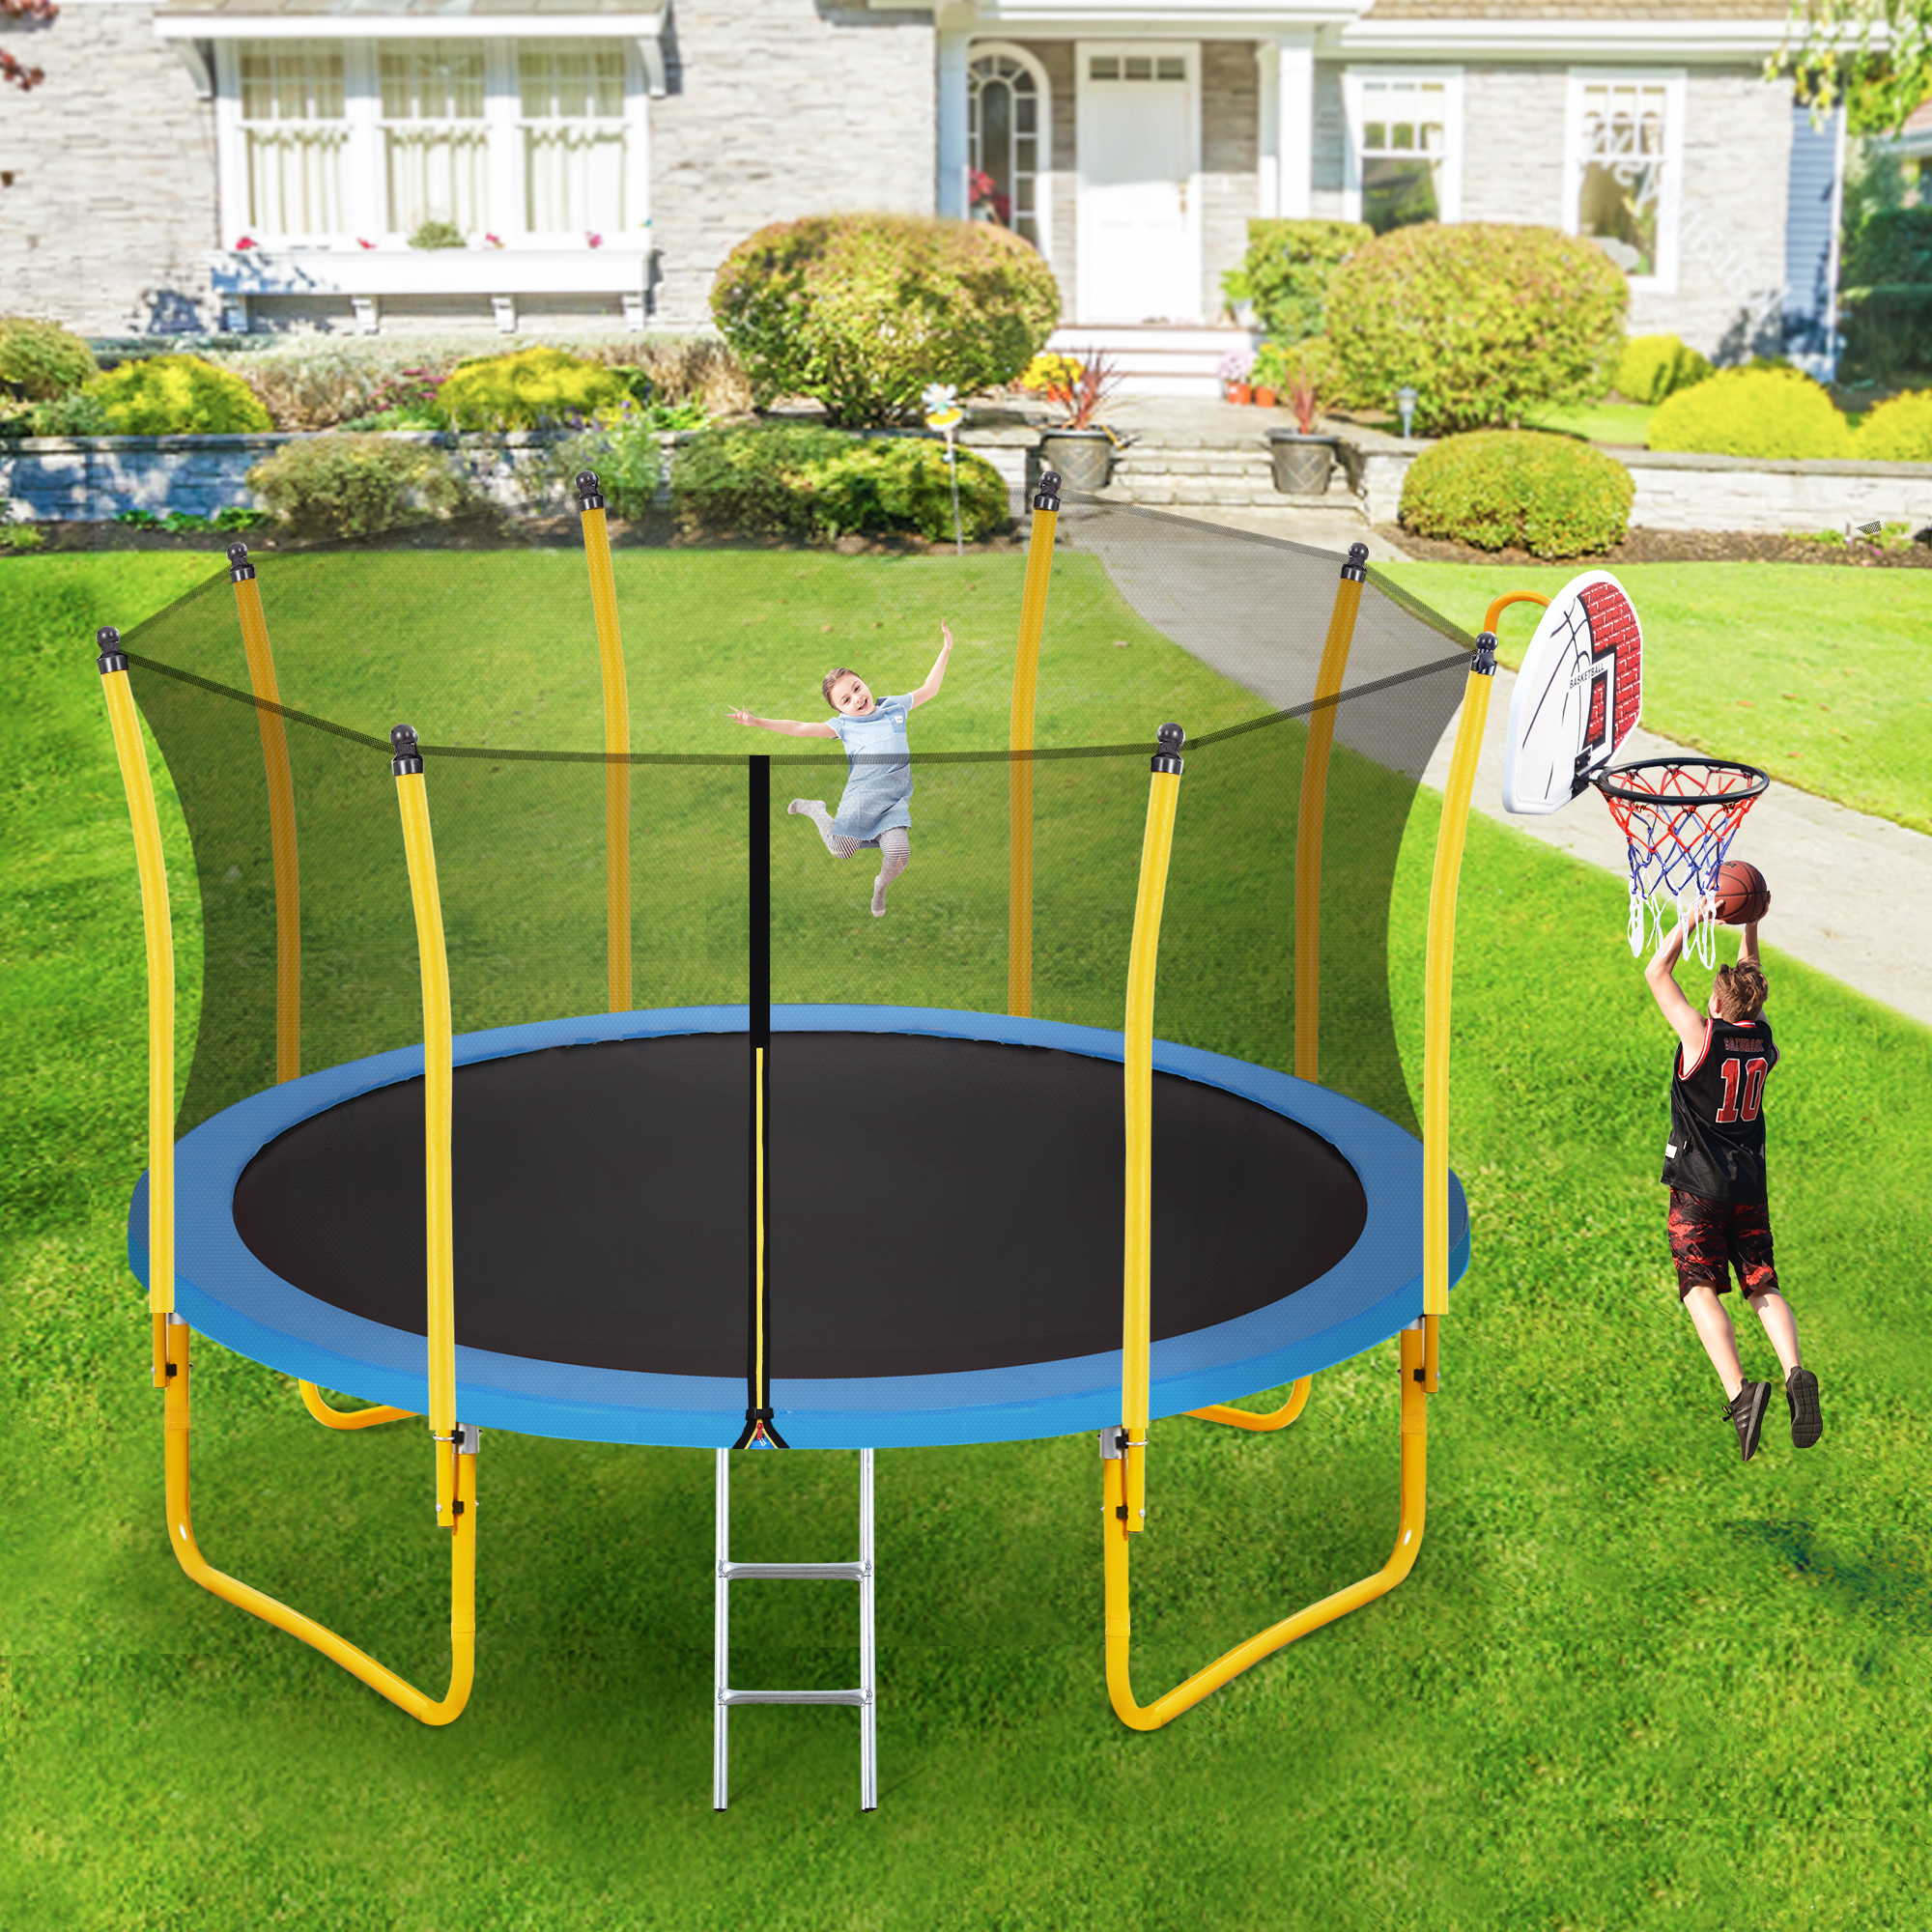 12FT Trampoline for Kids with Safety Enclosure Net, Basketball Hoop and Ladder, Easy Assembly Round Outdoor Recreational Trampoline-CASAINC